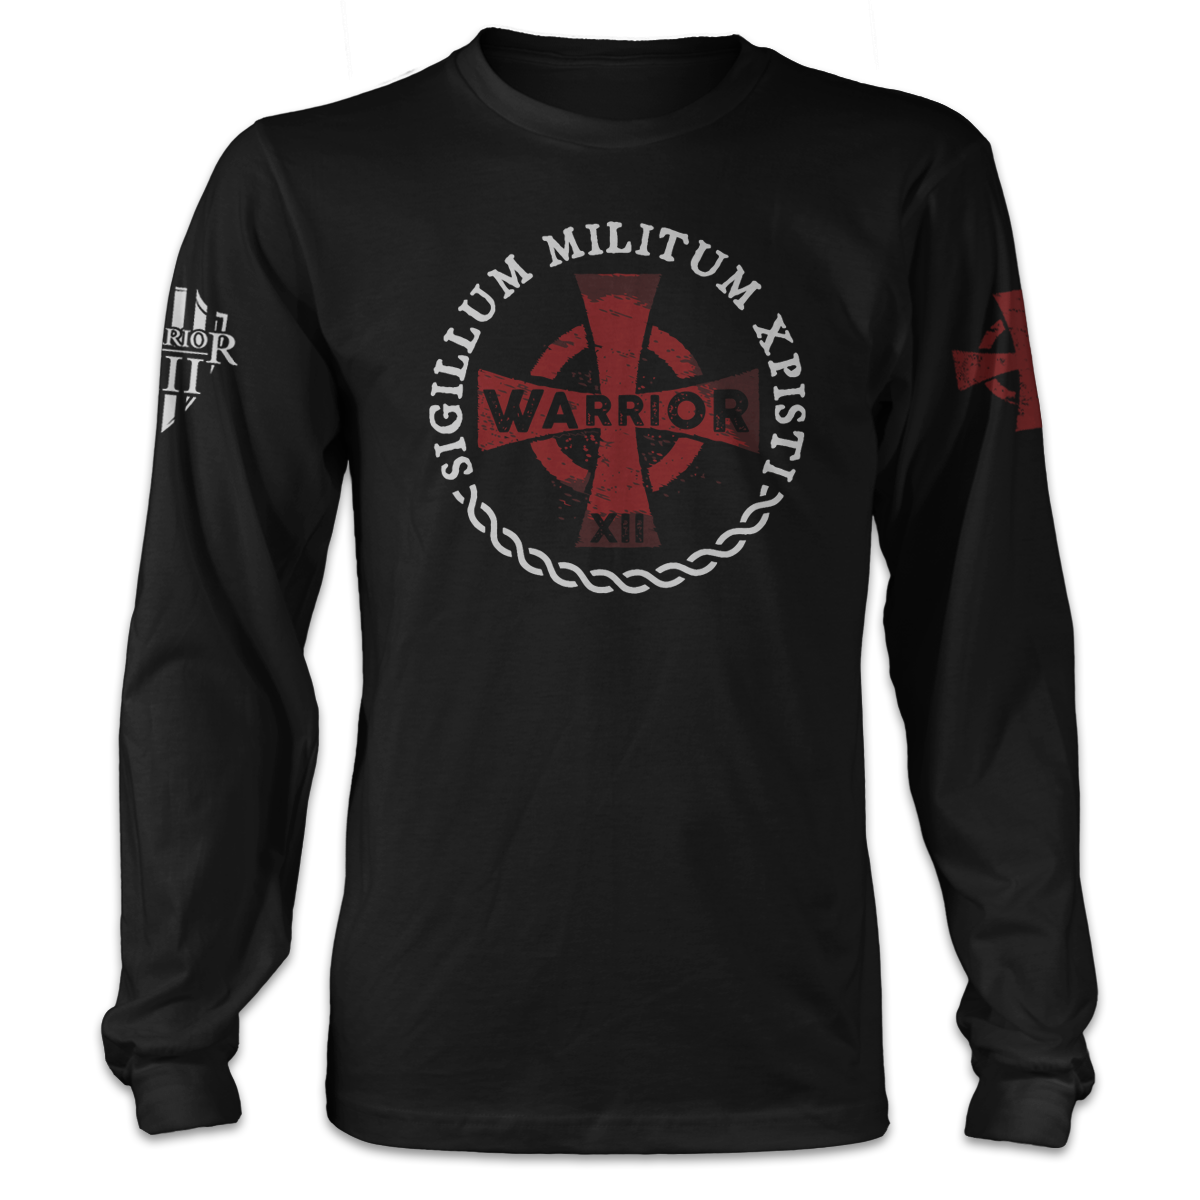 A black American Infidel long sleeve shirt with the words Templar Seal which is‚"Army Of Christ‚" written in Latin.